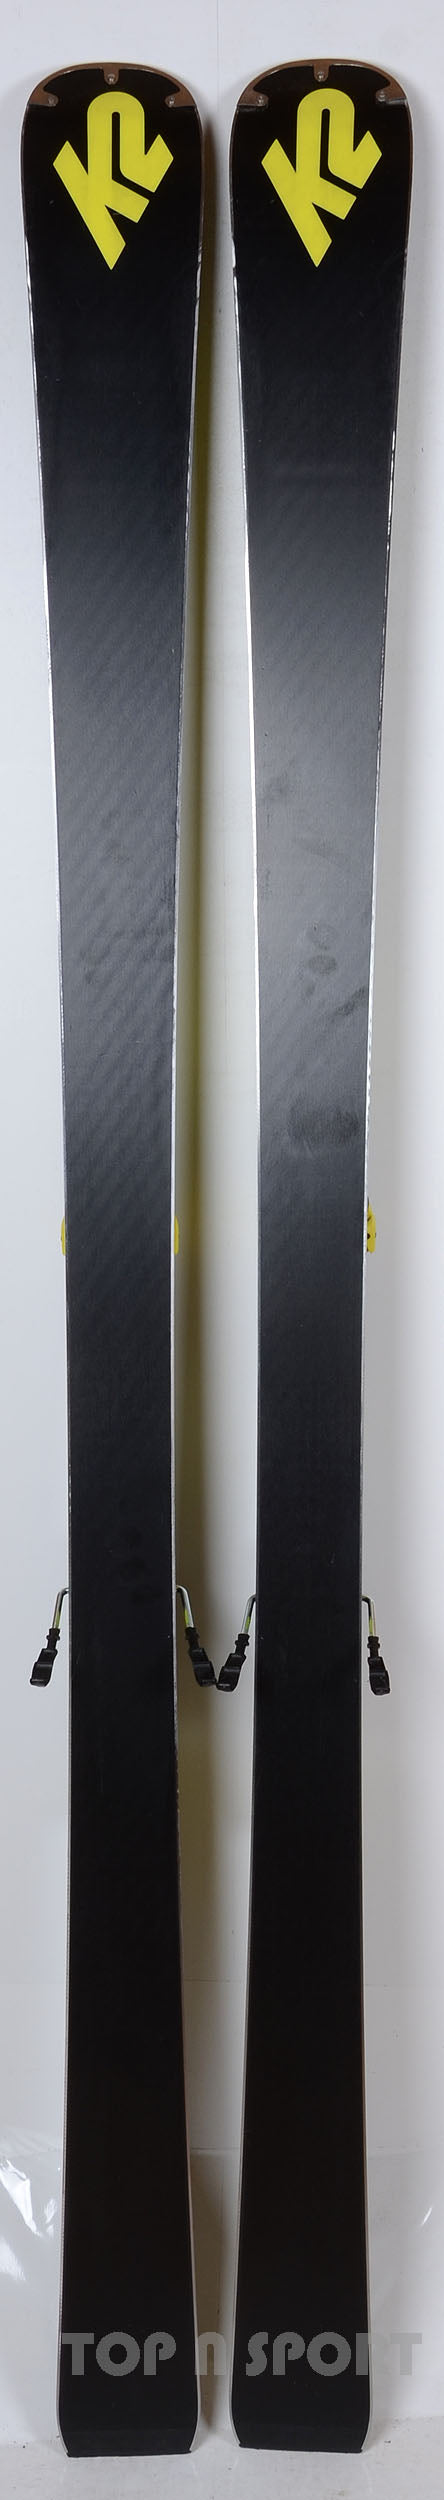 K2 CHARGER 2017 - Skis d'occasion